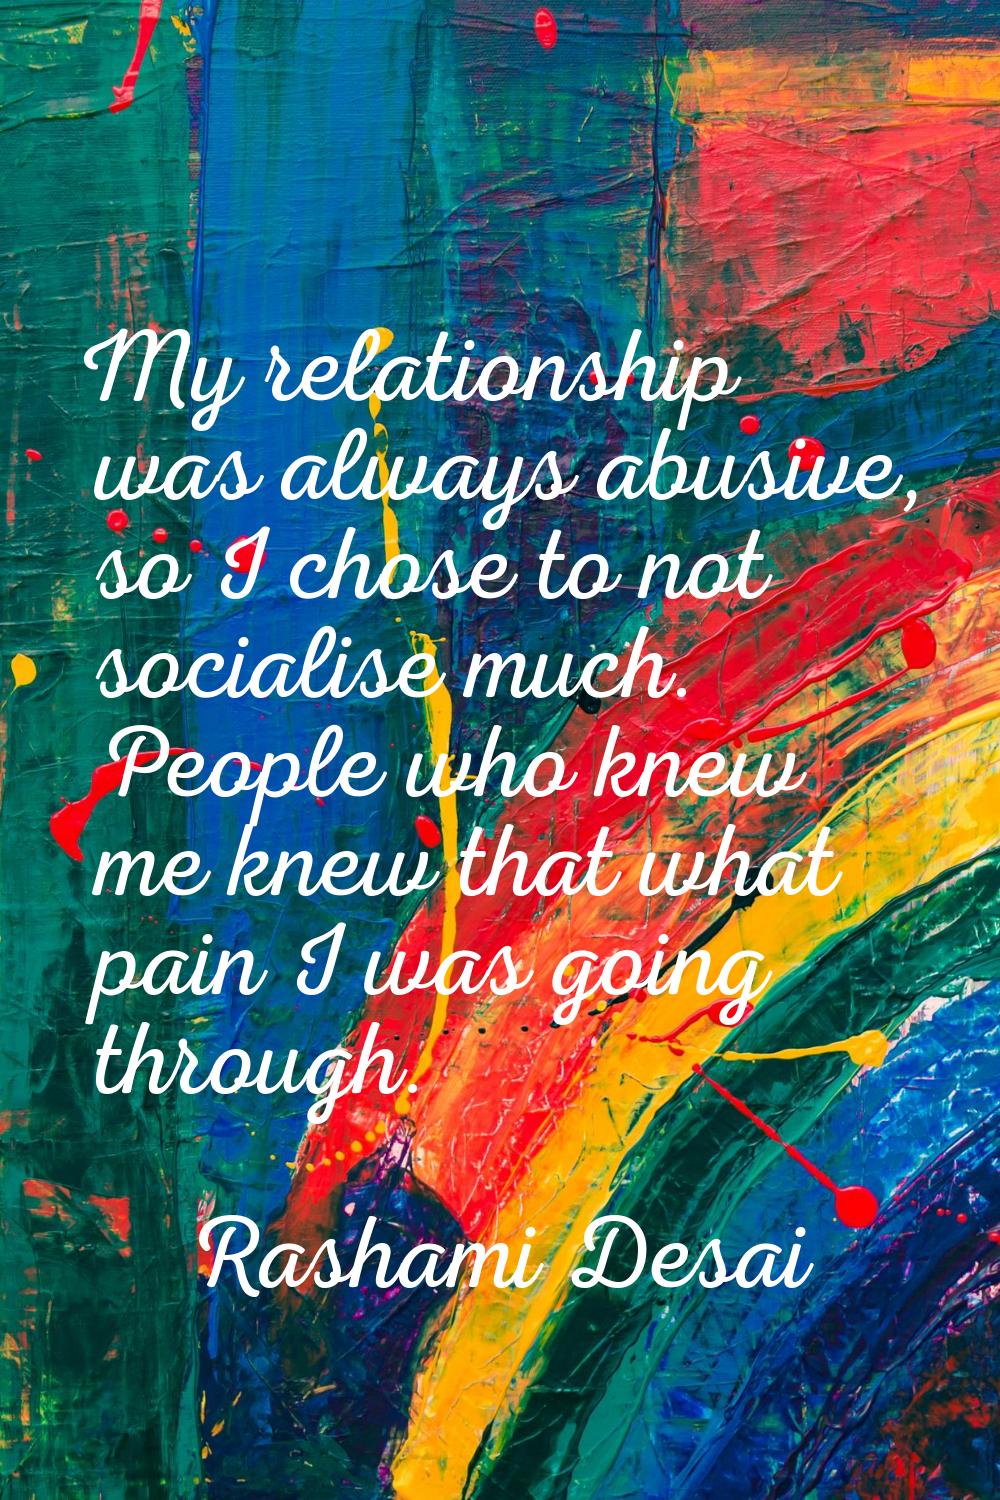 My relationship was always abusive, so I chose to not socialise much. People who knew me knew that 